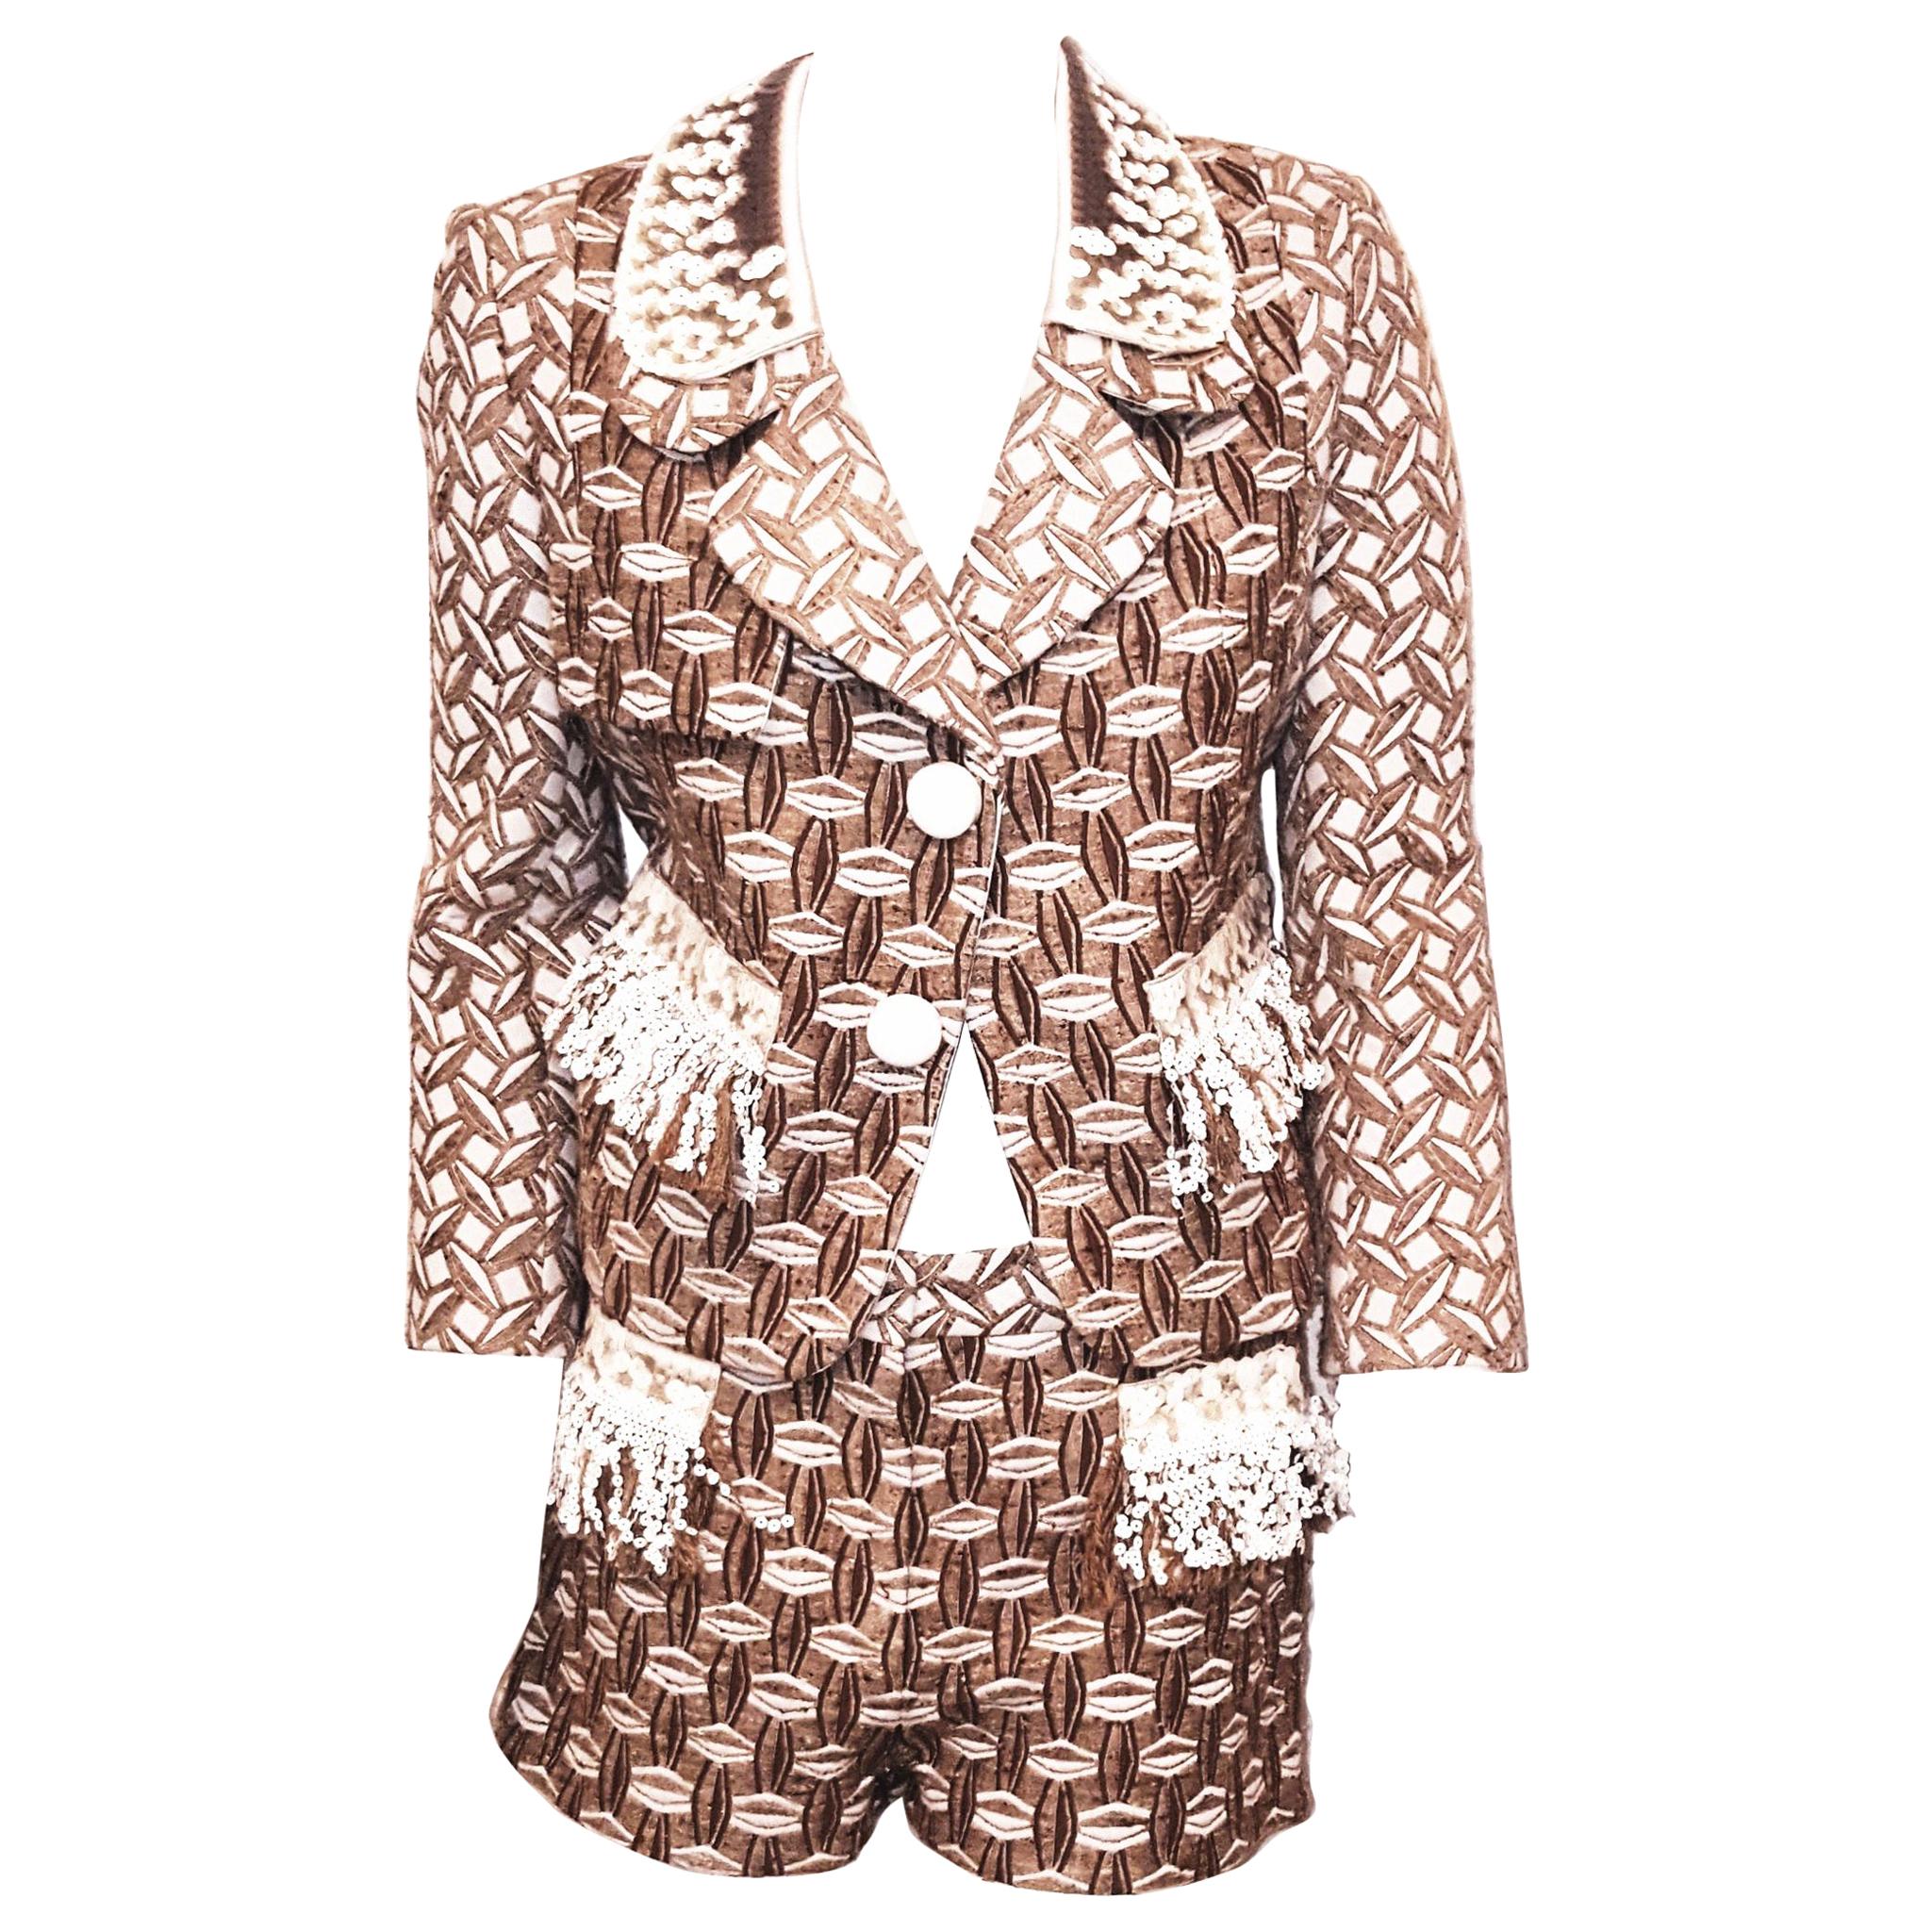 Louis Vuitton 3-Piece Suit with Jacket, Shorts and Dress With Sequins 40 EU